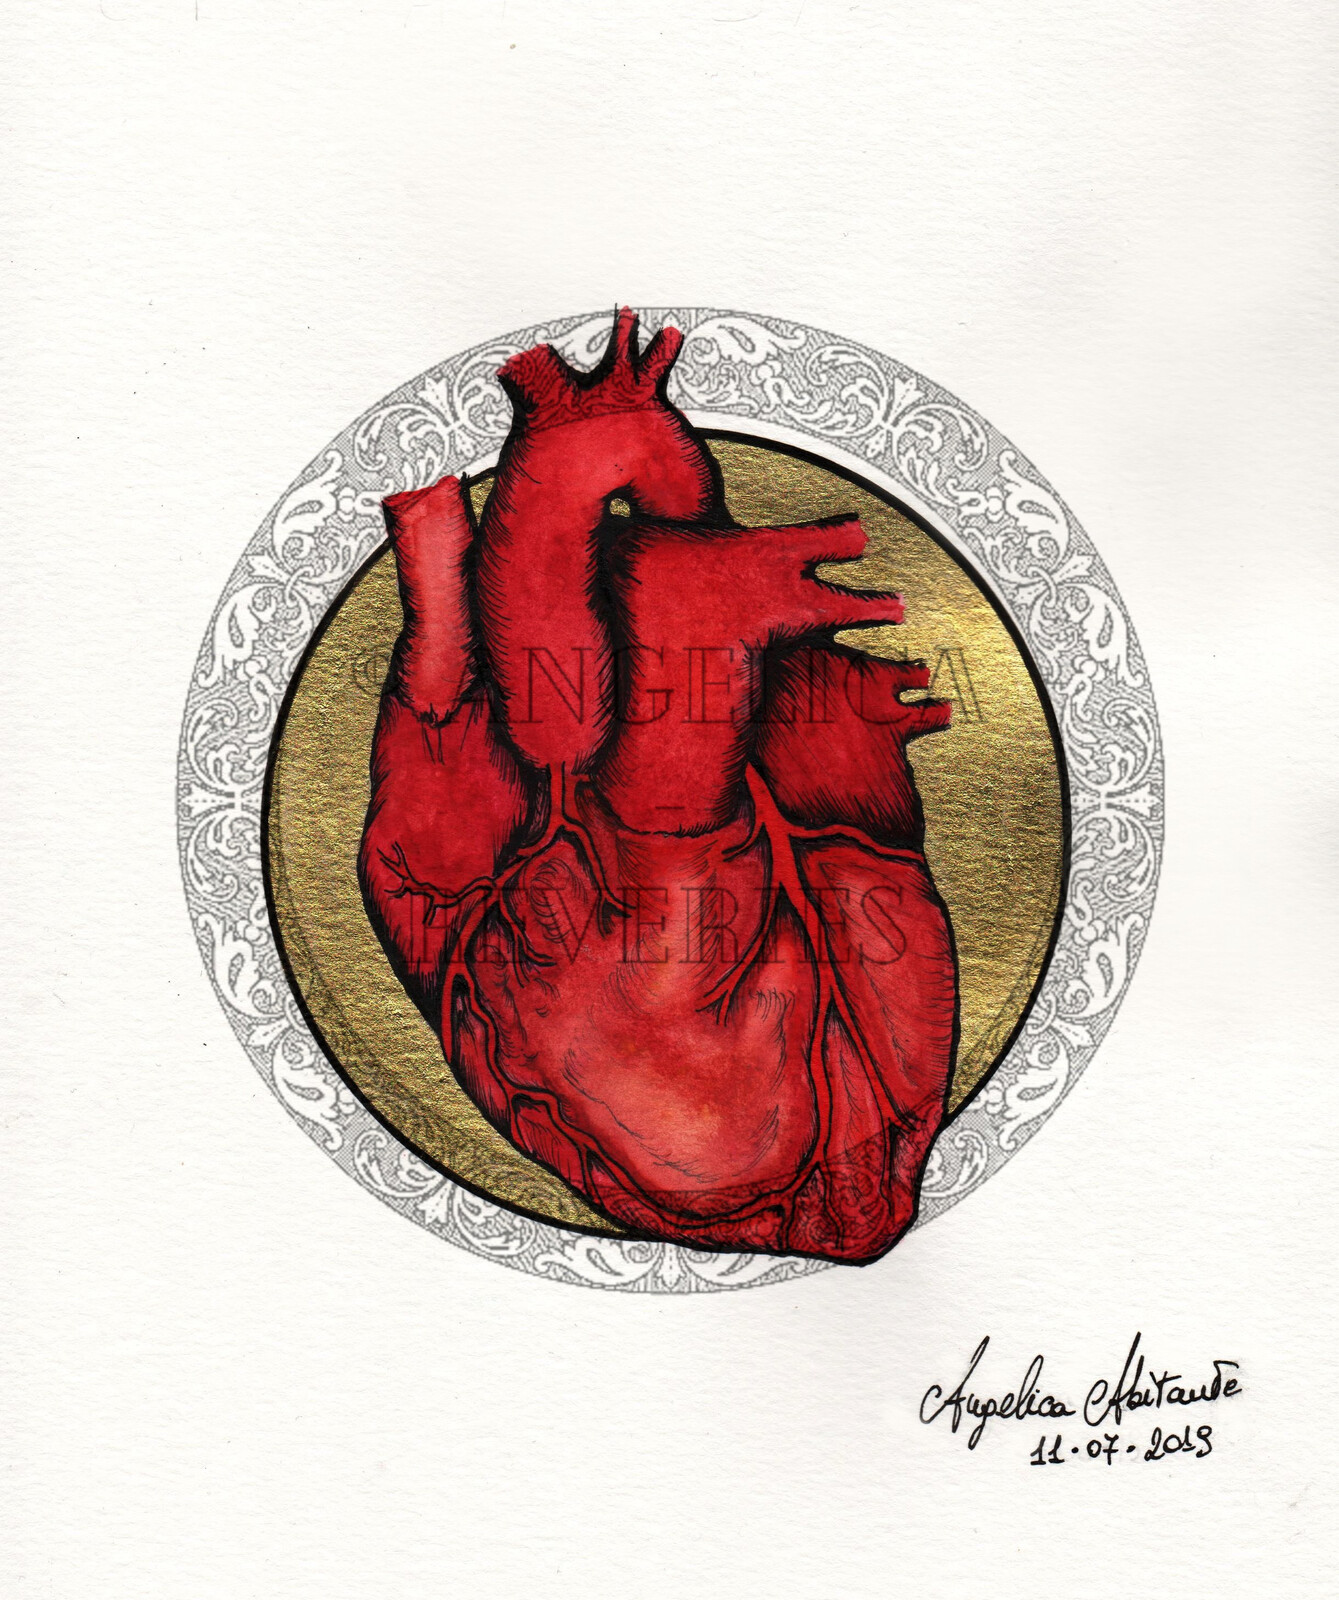 "Redemption"
Anatomical heart study #2
Inks and watercolors.

